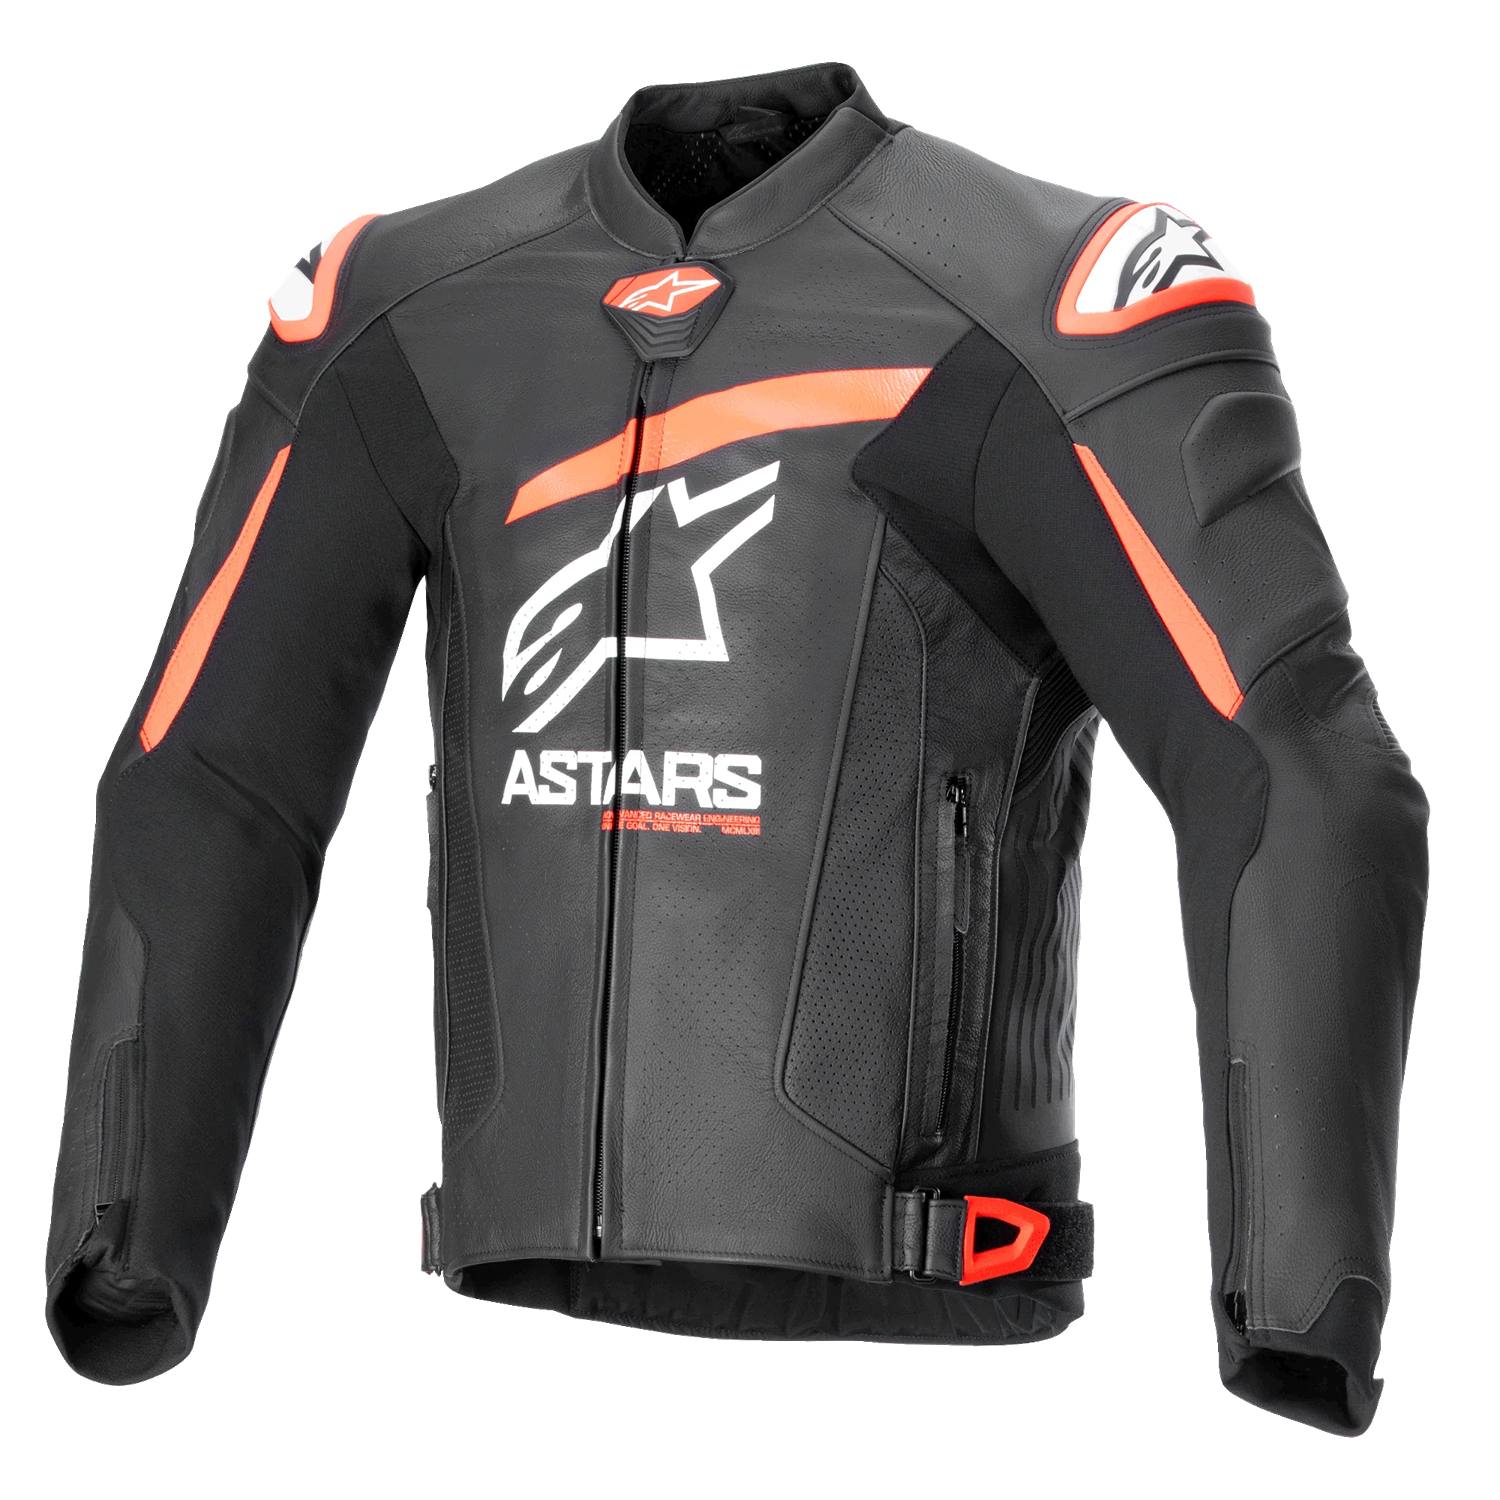 Image of Alpinestars Gp Plus R V4 Airflow Leather Jacket Black Red Fluo White Size 58 ID 8059347341774